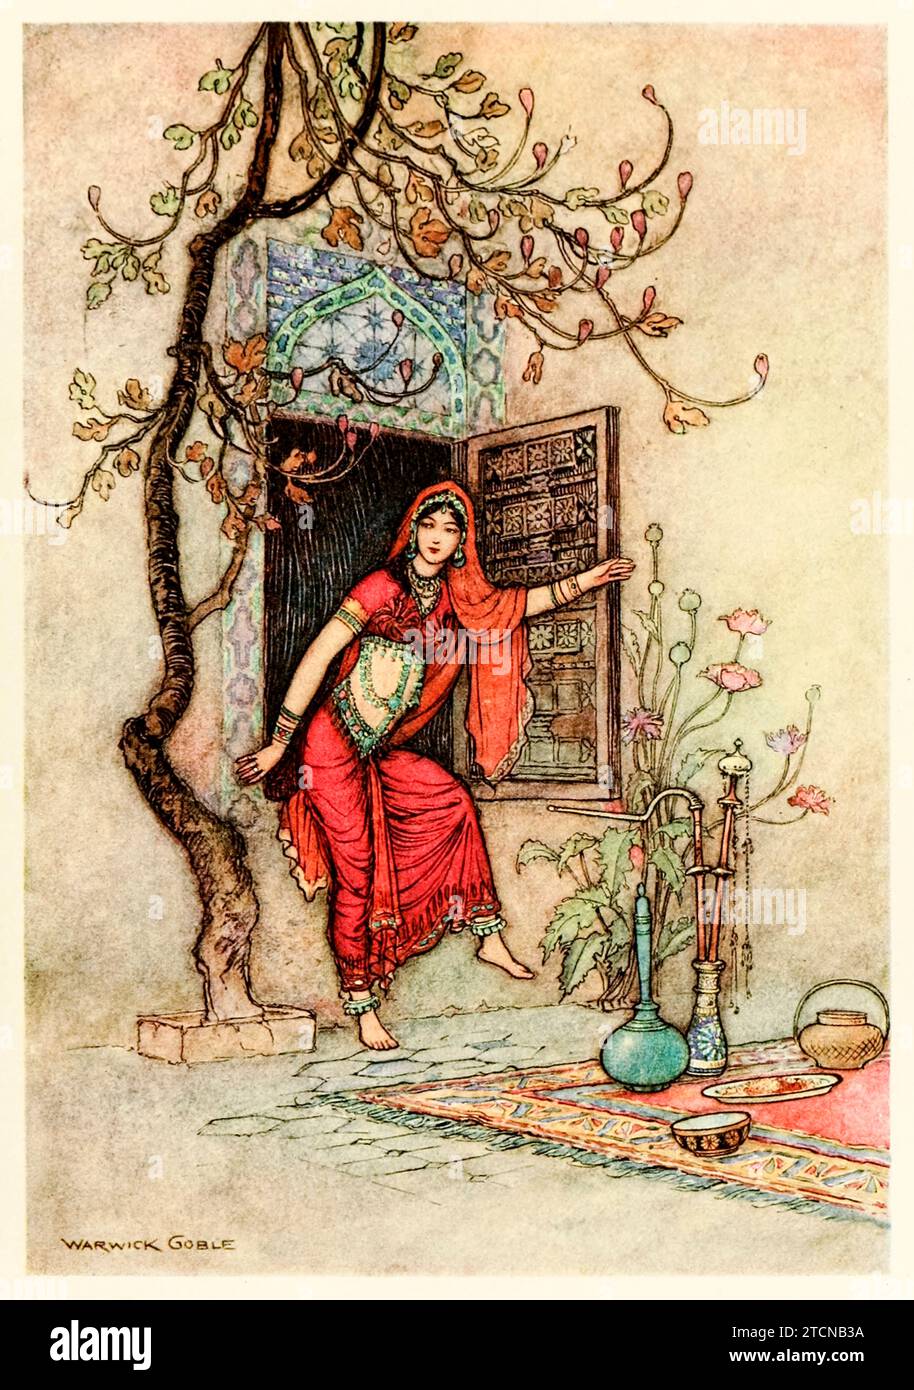 ‘The Girl of the Wall-Almirah’ from ‘Folk-tales of Bengal’ by Lal Behari Day (1824-1882), illustration by Warwick Goble (1862-1972). Photograph from a 1912 edition. Credit: Private Collection / AF Fotografie Stock Photo